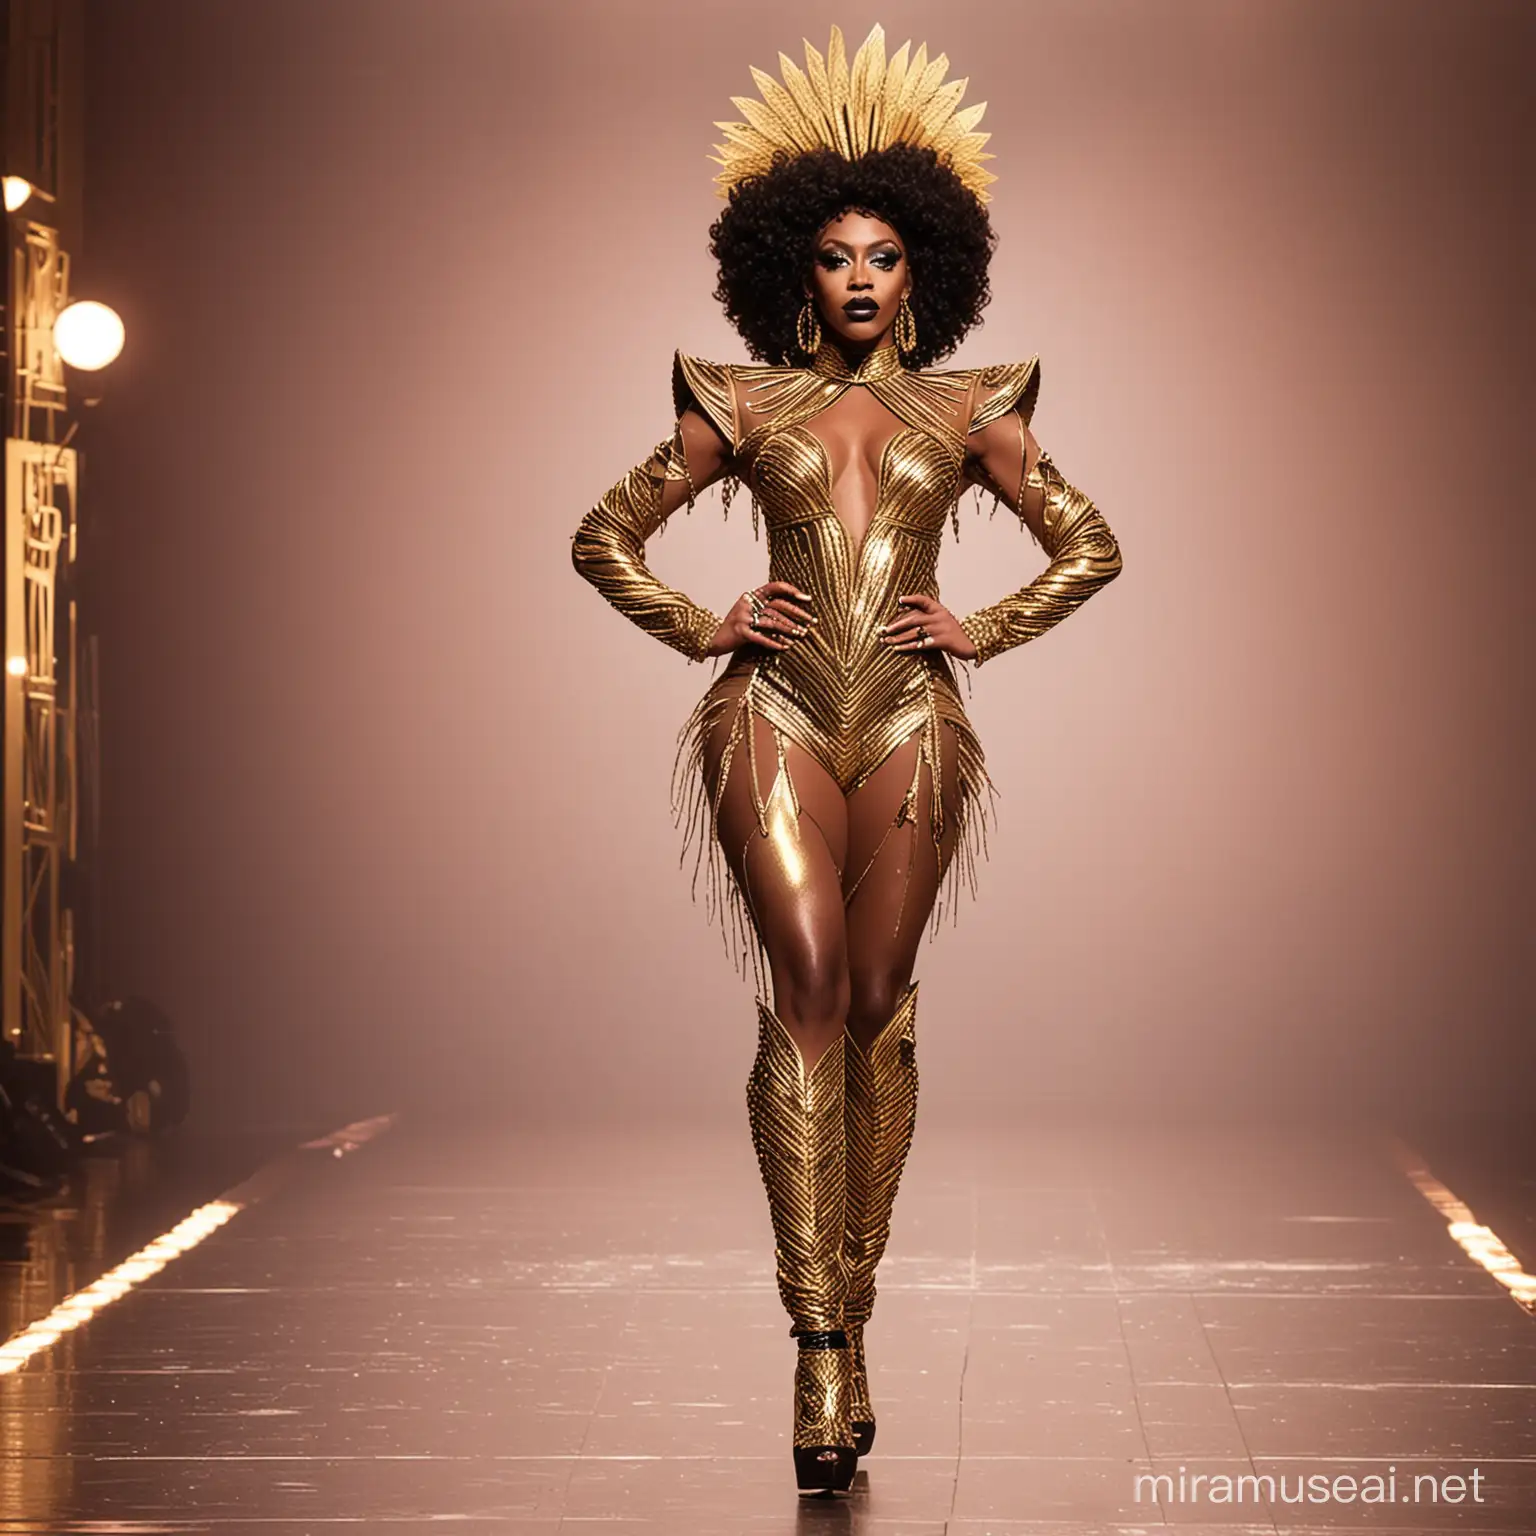 African American Drag Queen Struts in Black and Gold Outfit on RuPauls Drag Race Runway